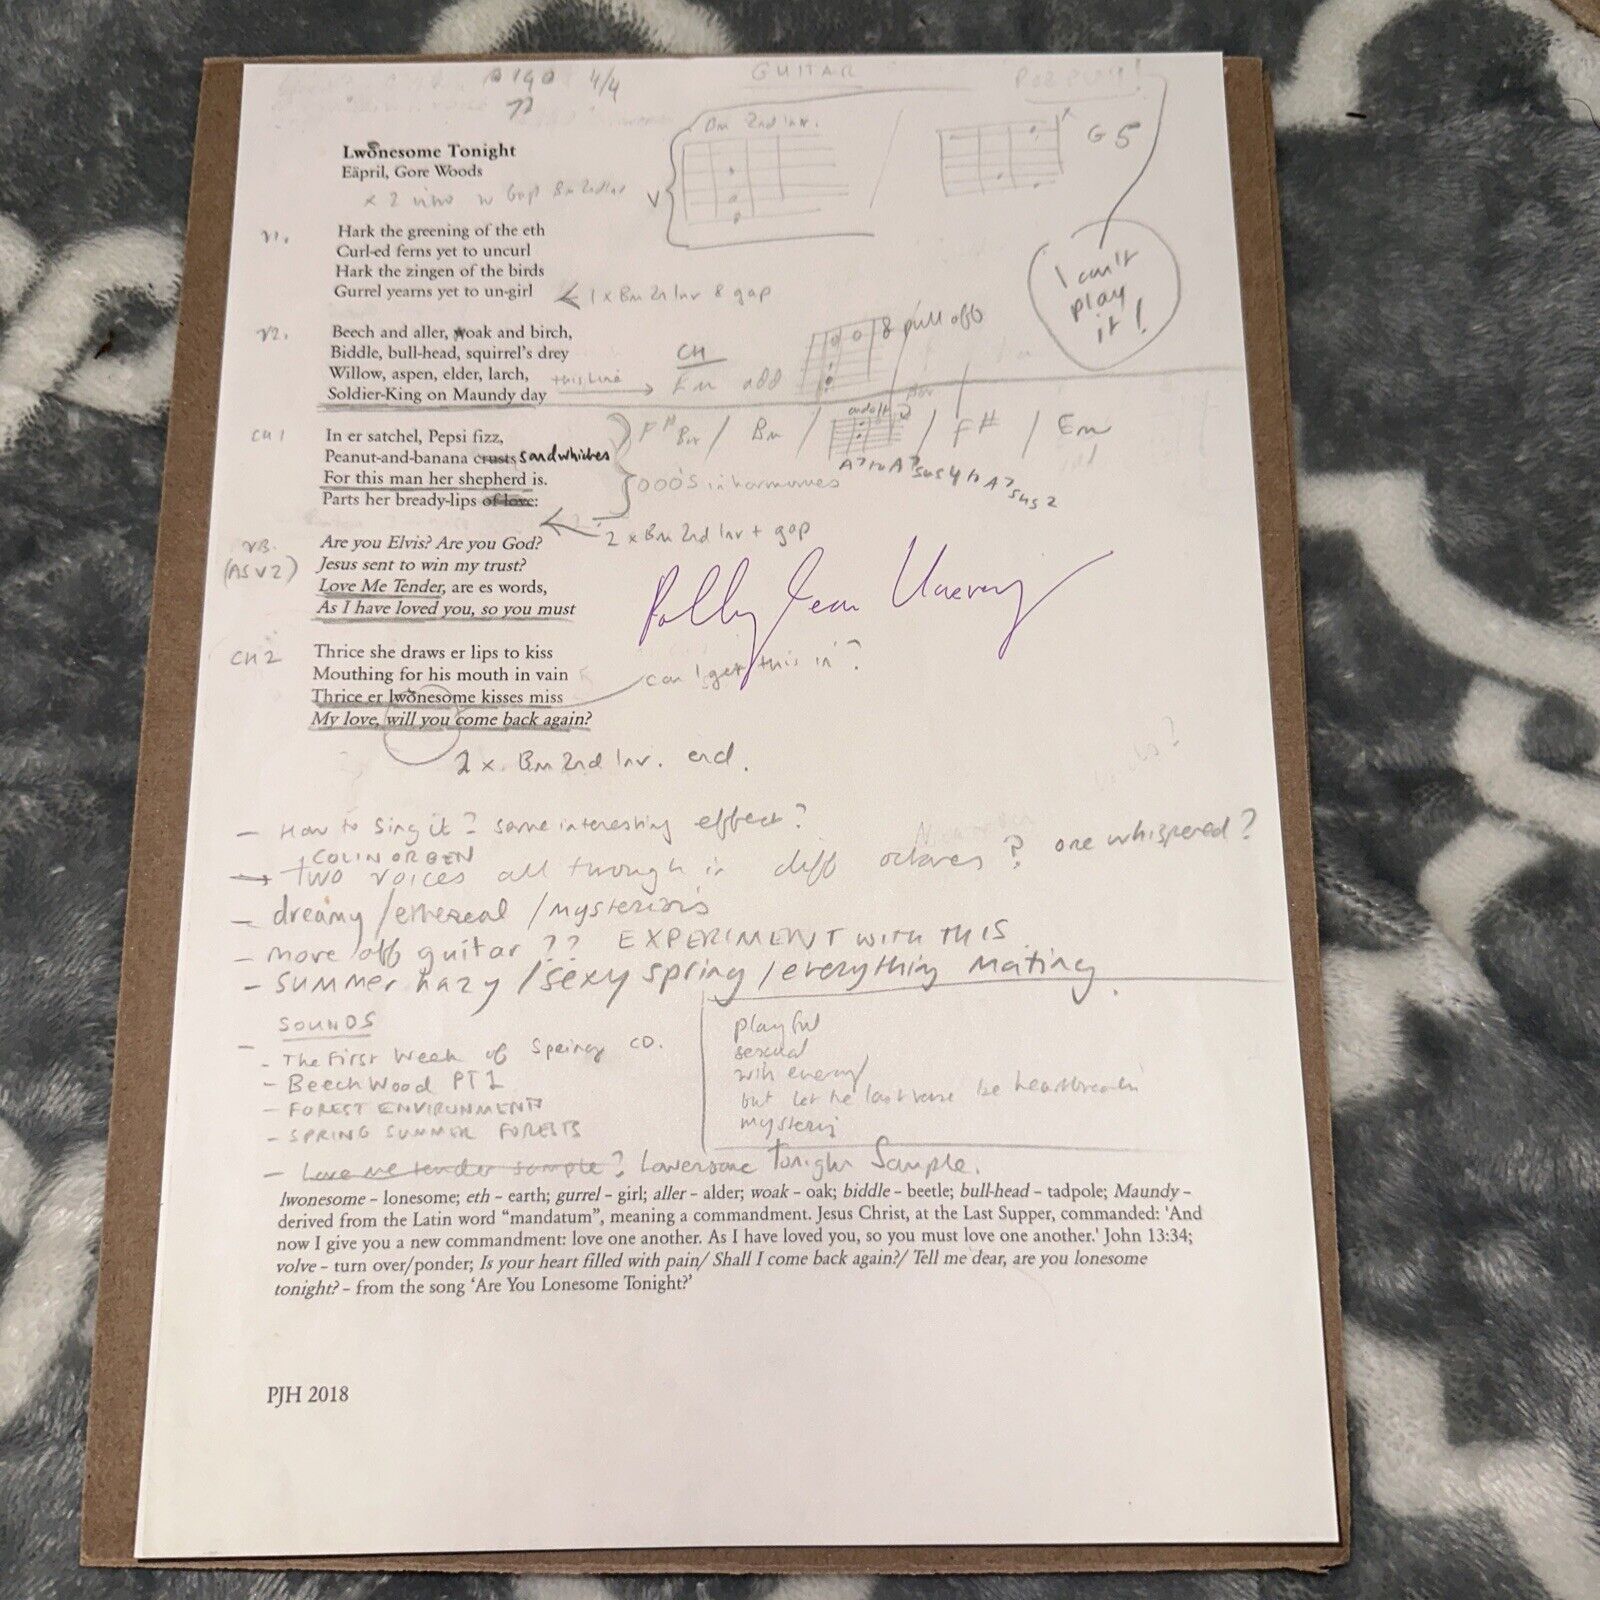 PJ Harvey - Lwonesome Tonight Hand Signed Lyric Card, Autographed, Shipping Now